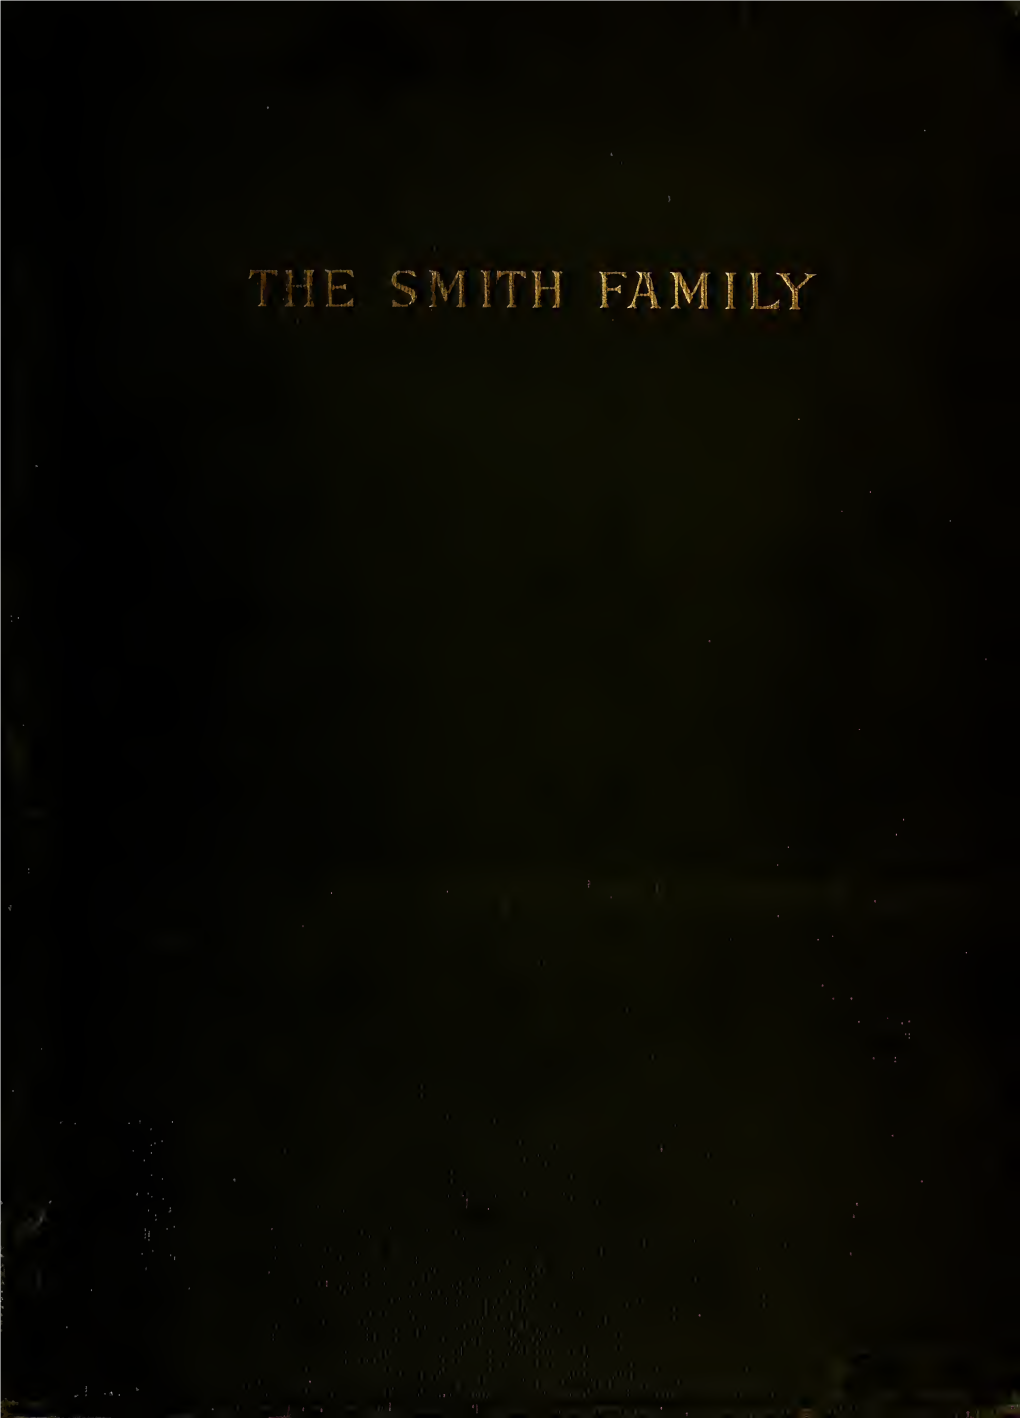 Record of the Smith Family Descended from John Smith, Born 1655 In